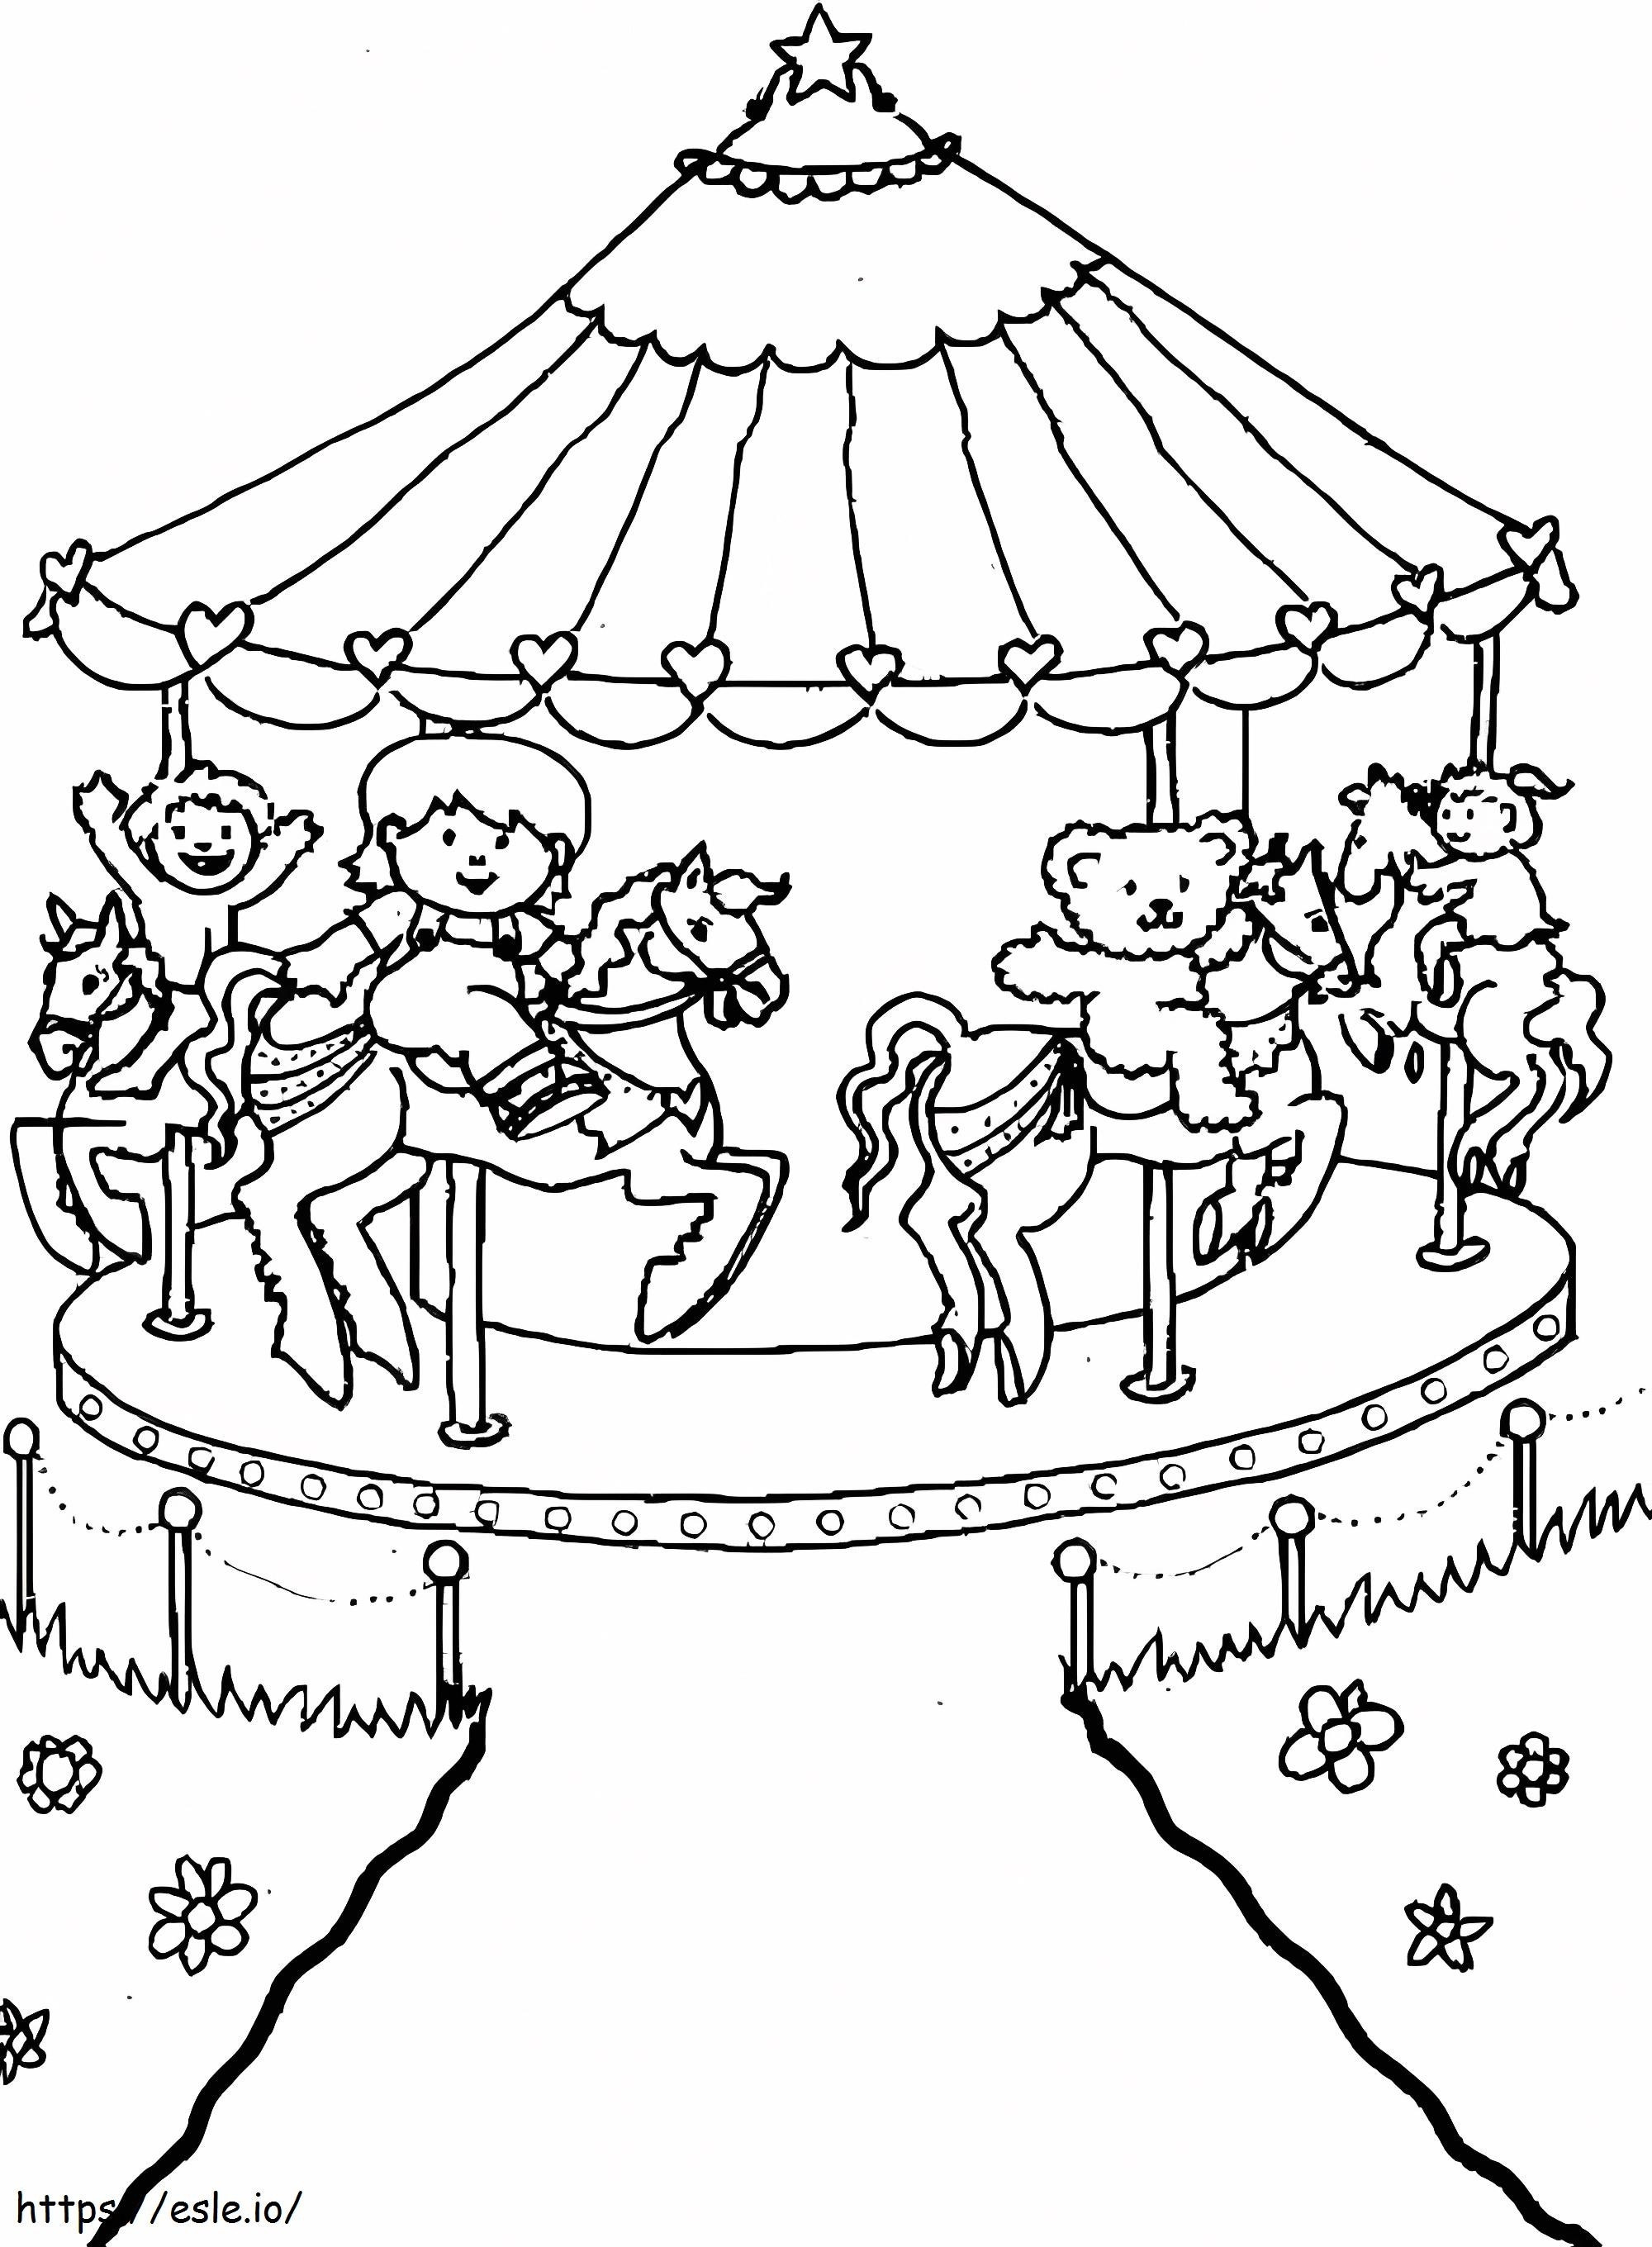 Carousel Ride coloring page